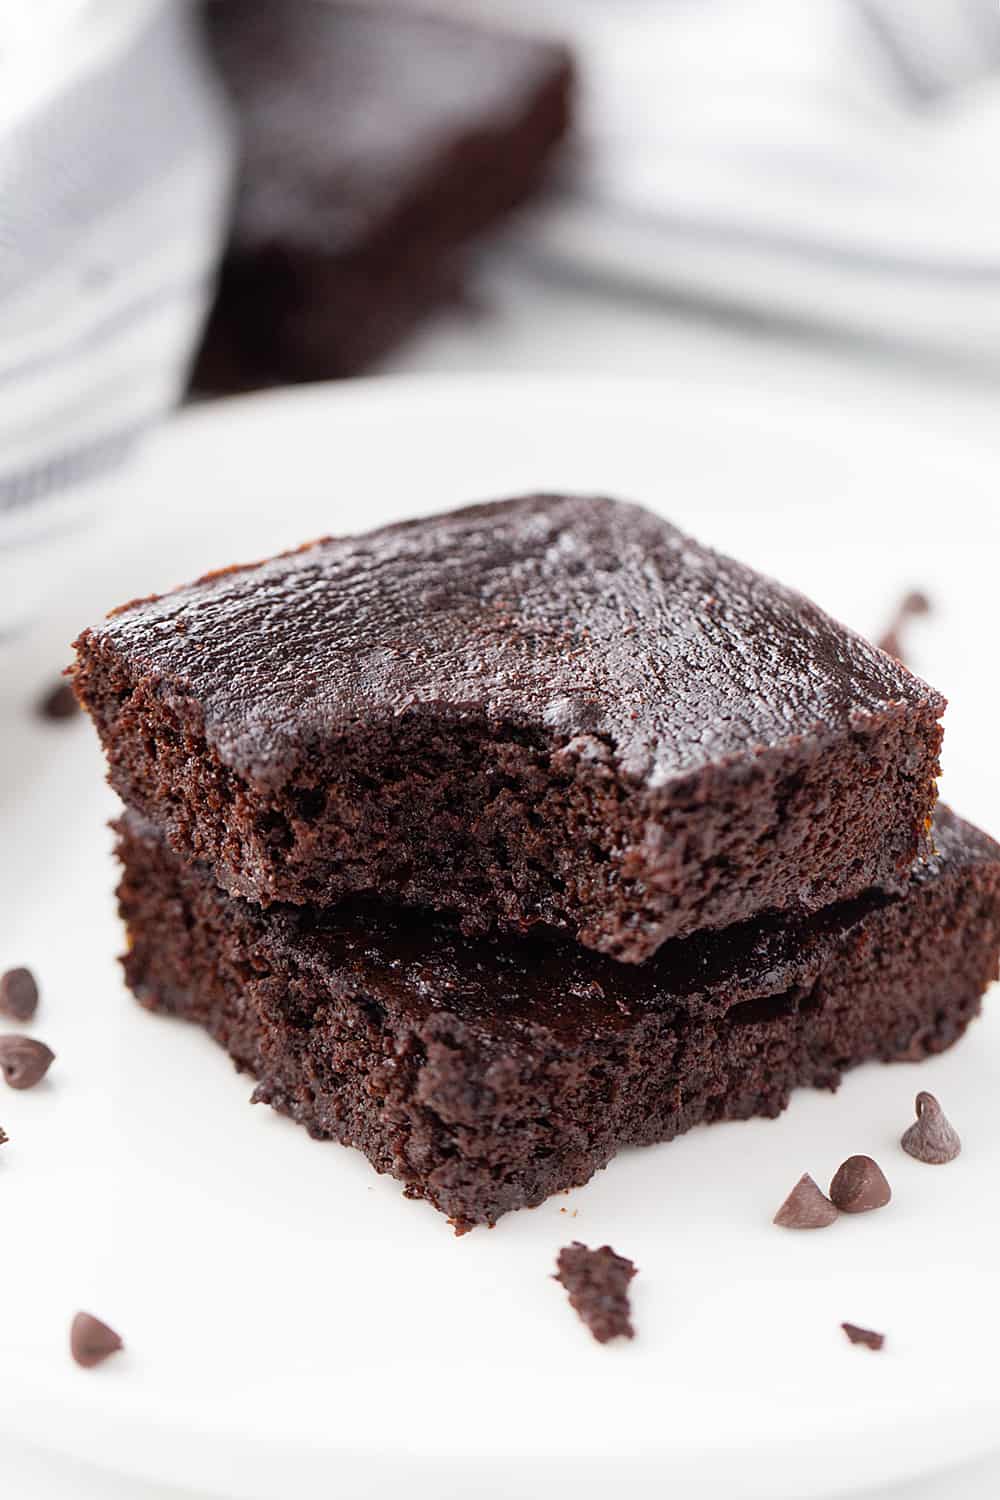 Gluten-Free Brownies: These fudgy, flourless gluten-free brownies are so rich and chocolaty, it's hard to believe they're less than 150 calories a serving! #brownies #glutenfree #flourless #flourlessbrownies #glutenfreebrownies #glutenfreedessert #baking #healthyrecipe #chocolate #halfscratched